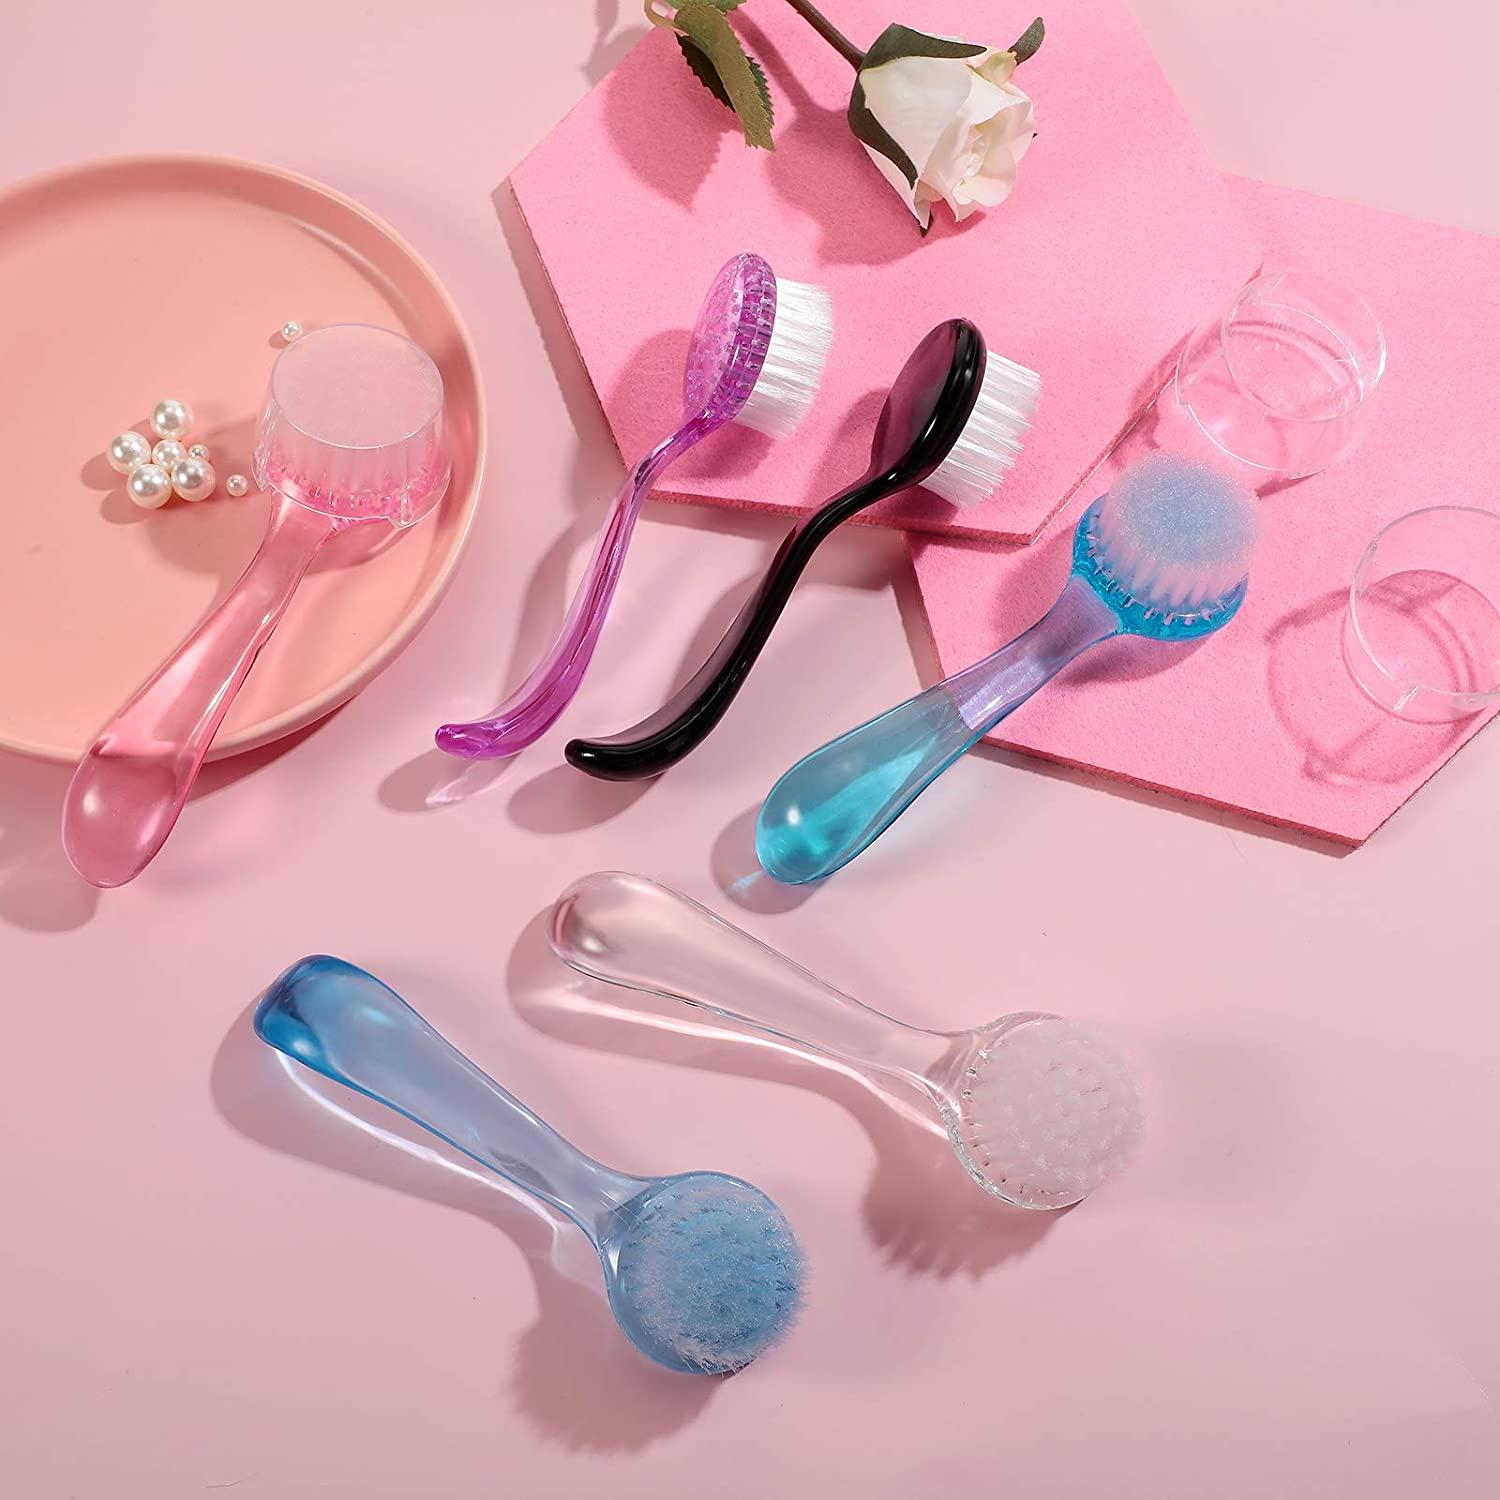 Clean Up Brush - Pink and Main LLC